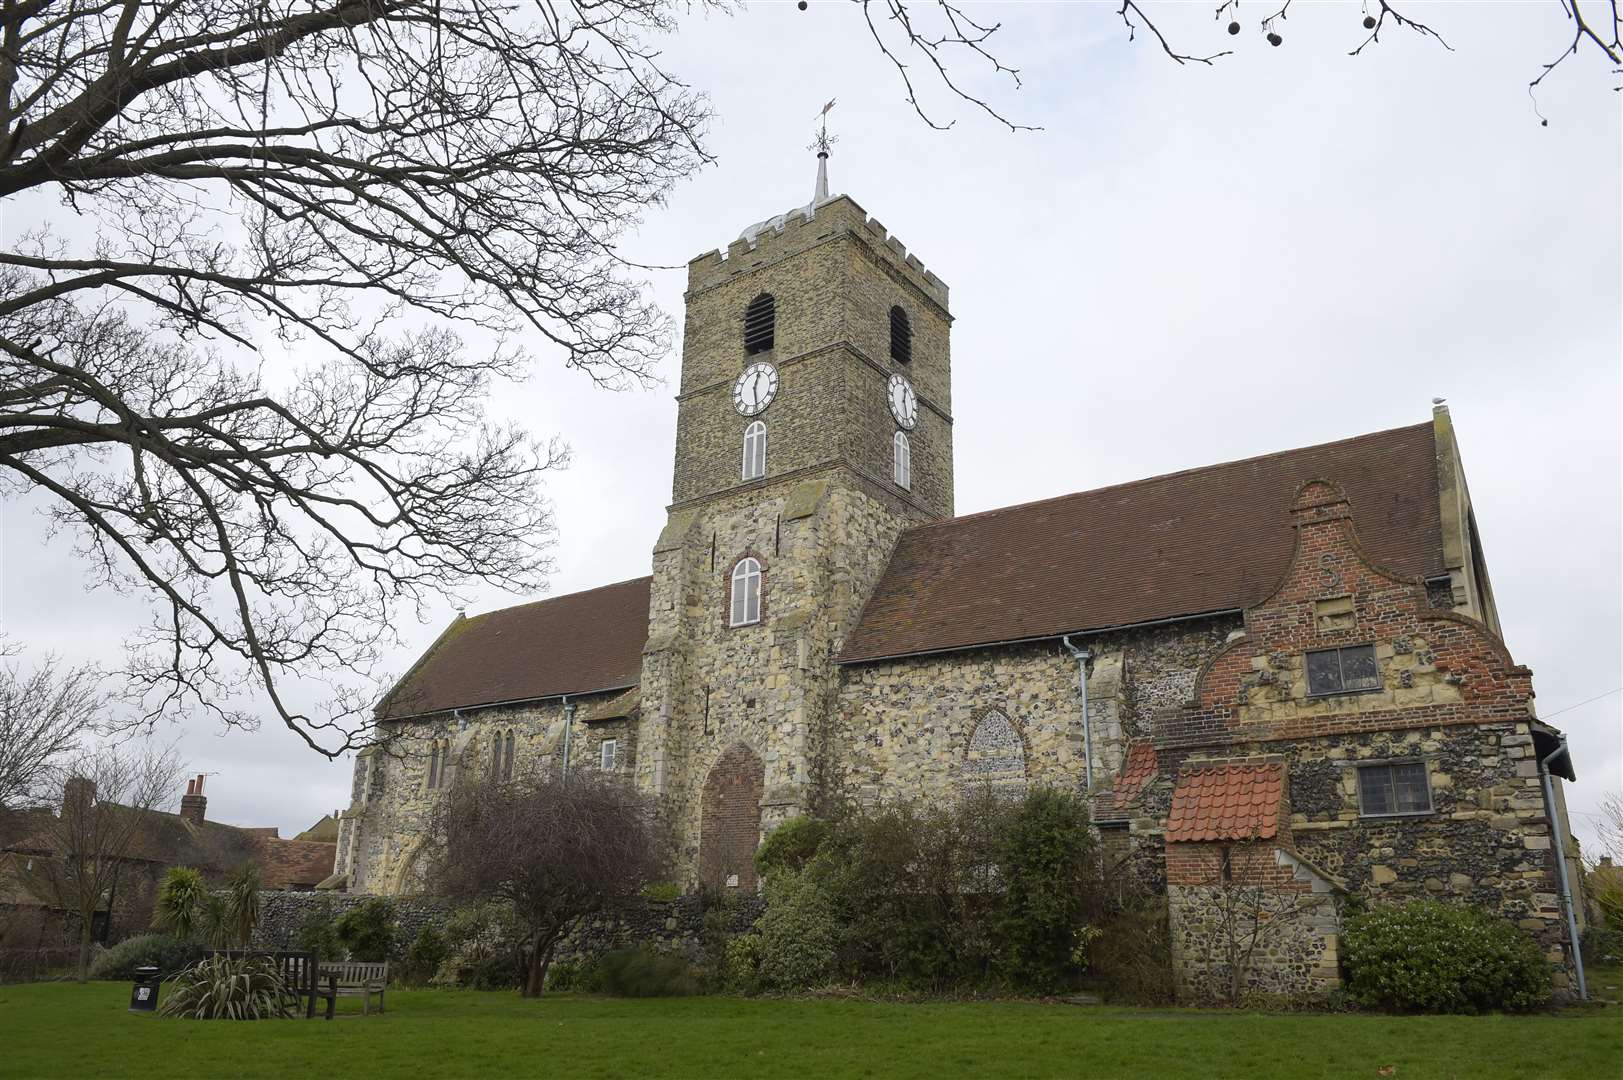 Cut price food will be available to members of The Sandwich Pantry at St Peter's Church, Sandwich